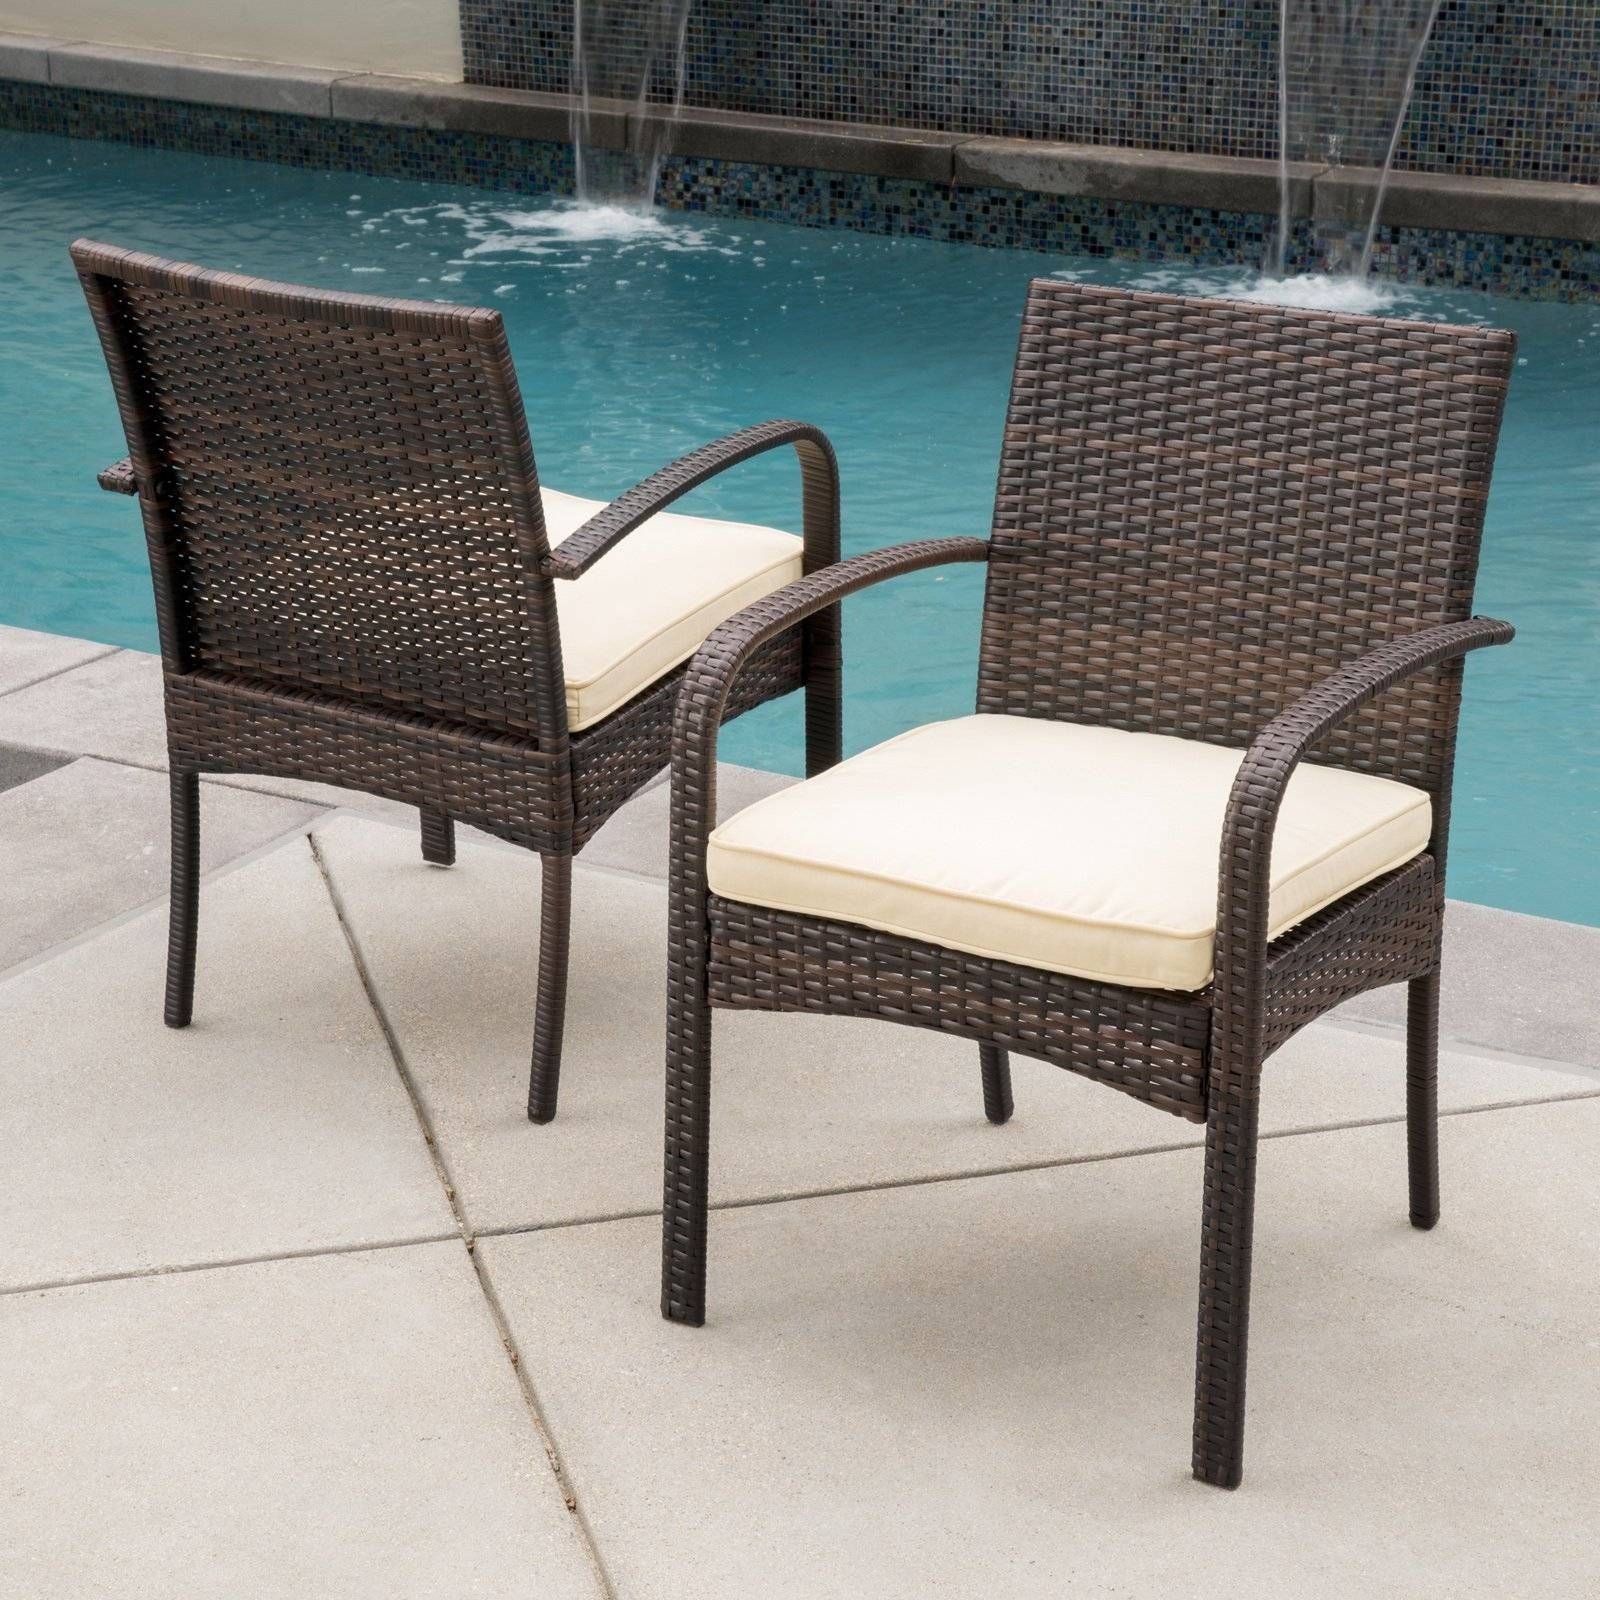 Patio: Stunning Cheap Patio Chairs Kmart Patio Furniture, Sears Intended For Cheap Patio Sofas (View 6 of 30)